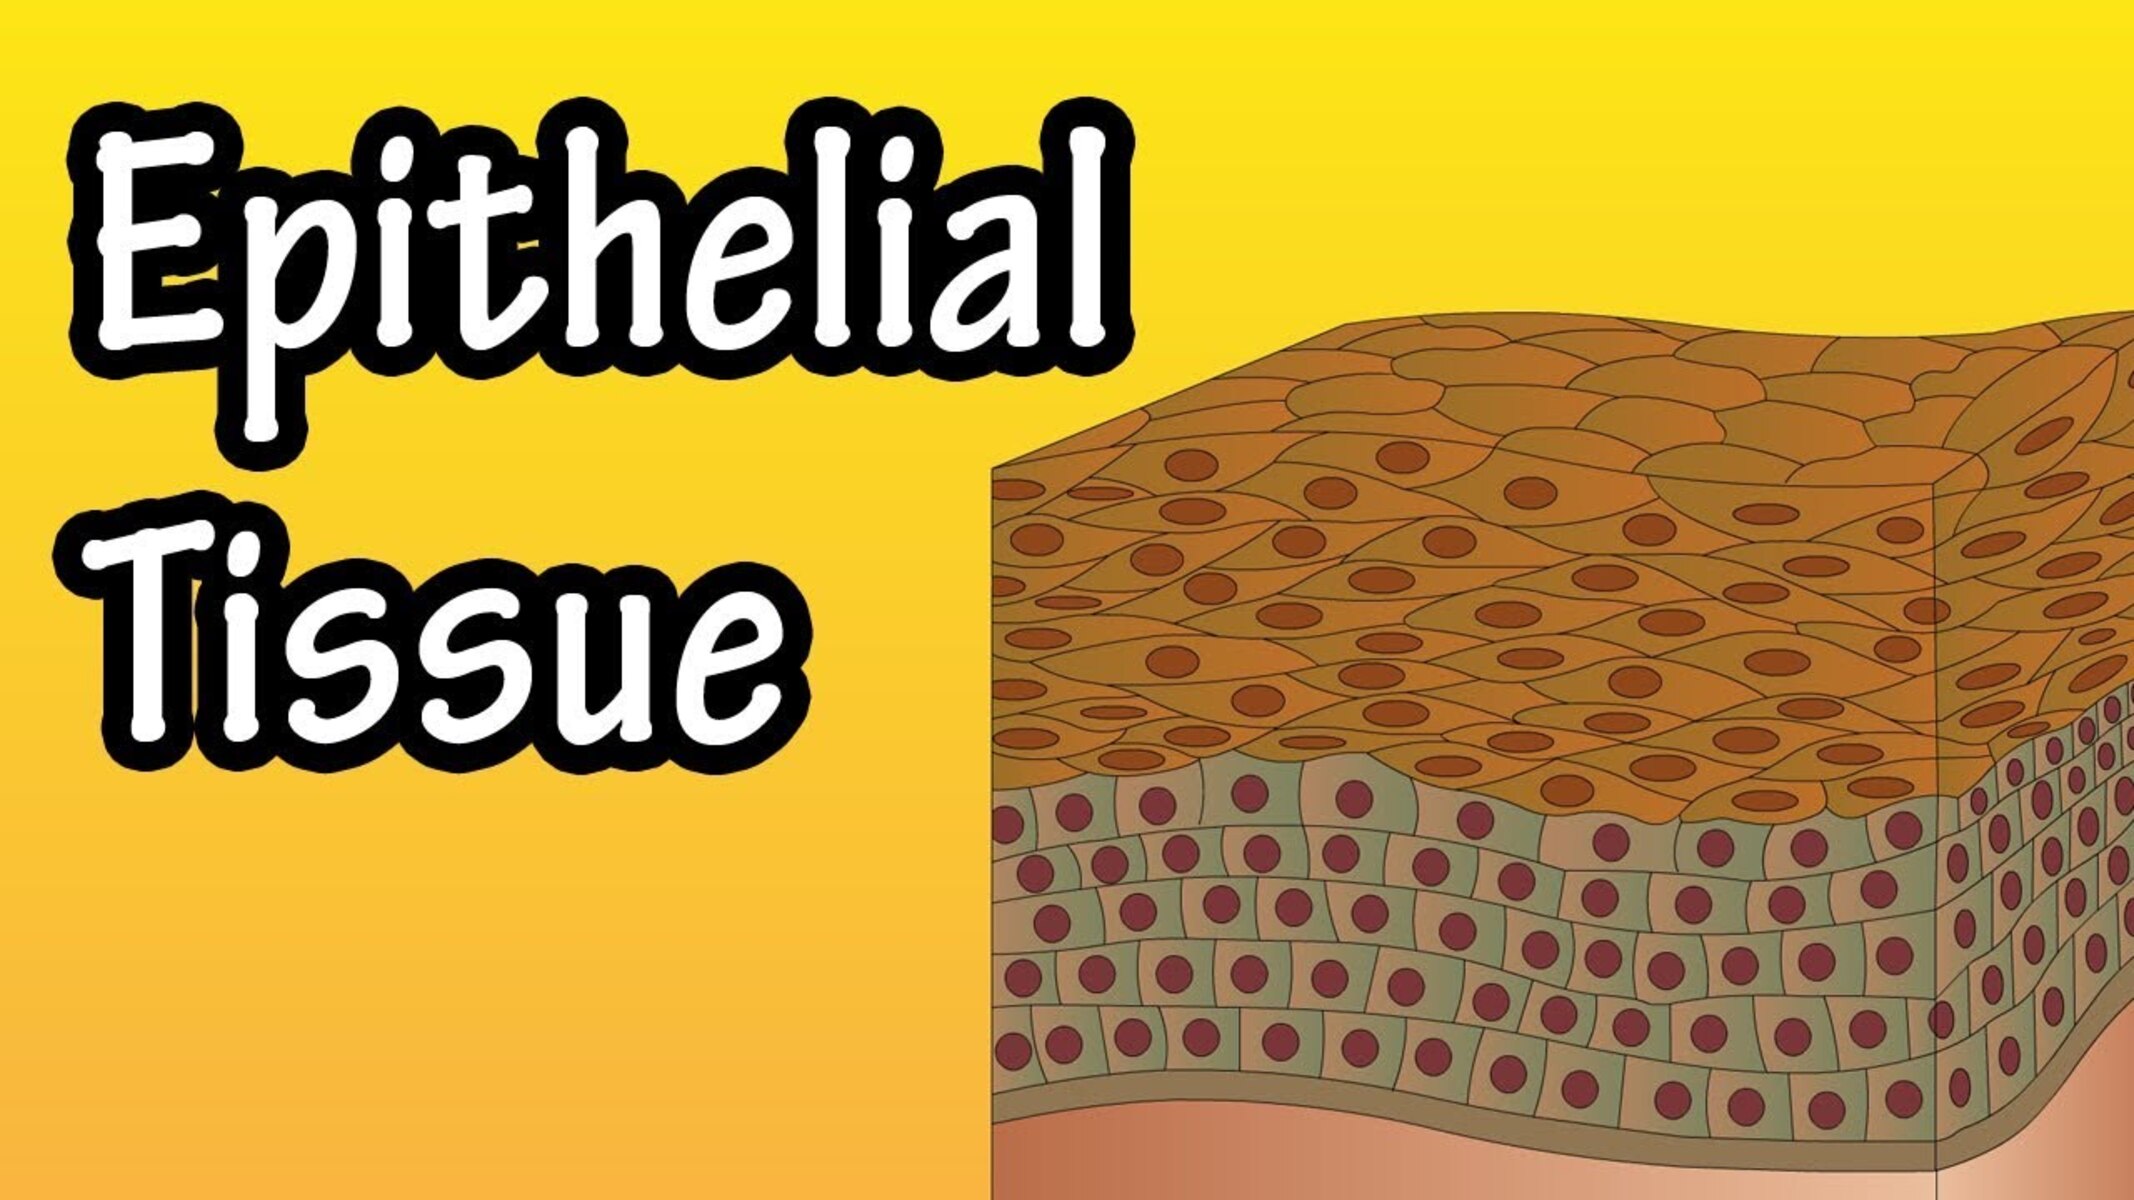 18-astounding-facts-about-epithelial-tissues